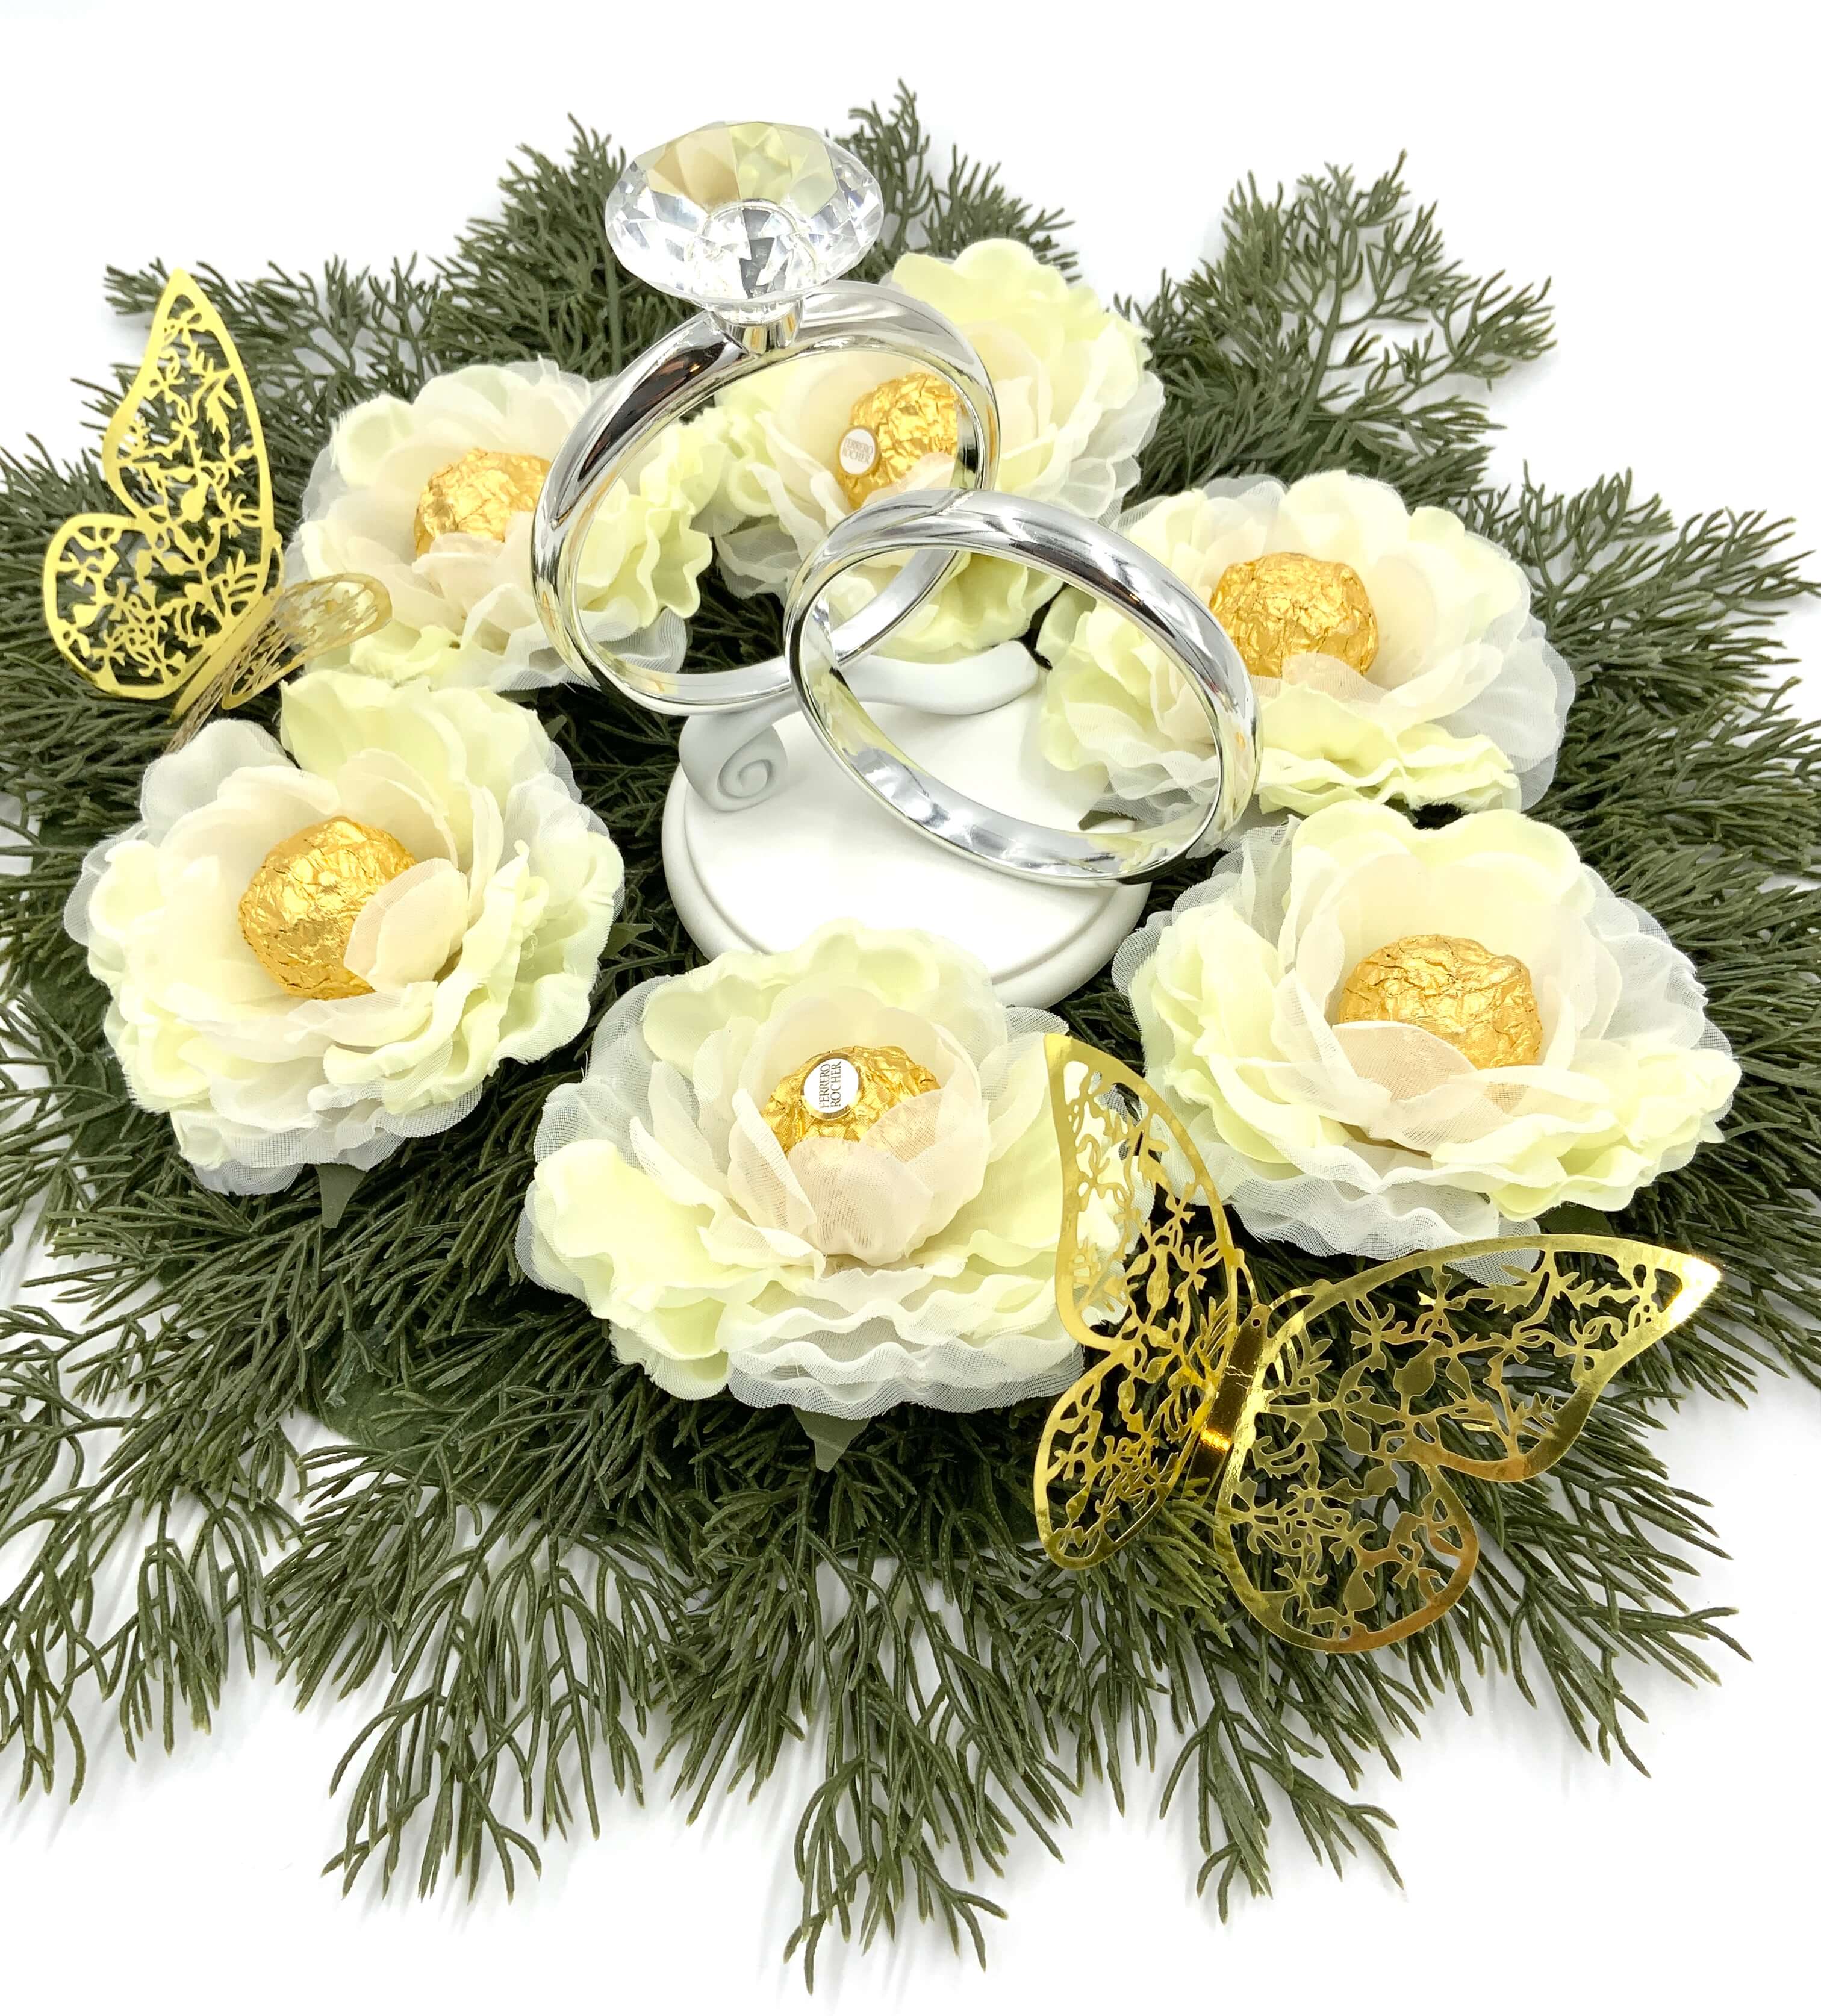 Delicate Yellow Flowers For Bridal Or Baby Shower Decor. Unique and Inexpensive Party Favors